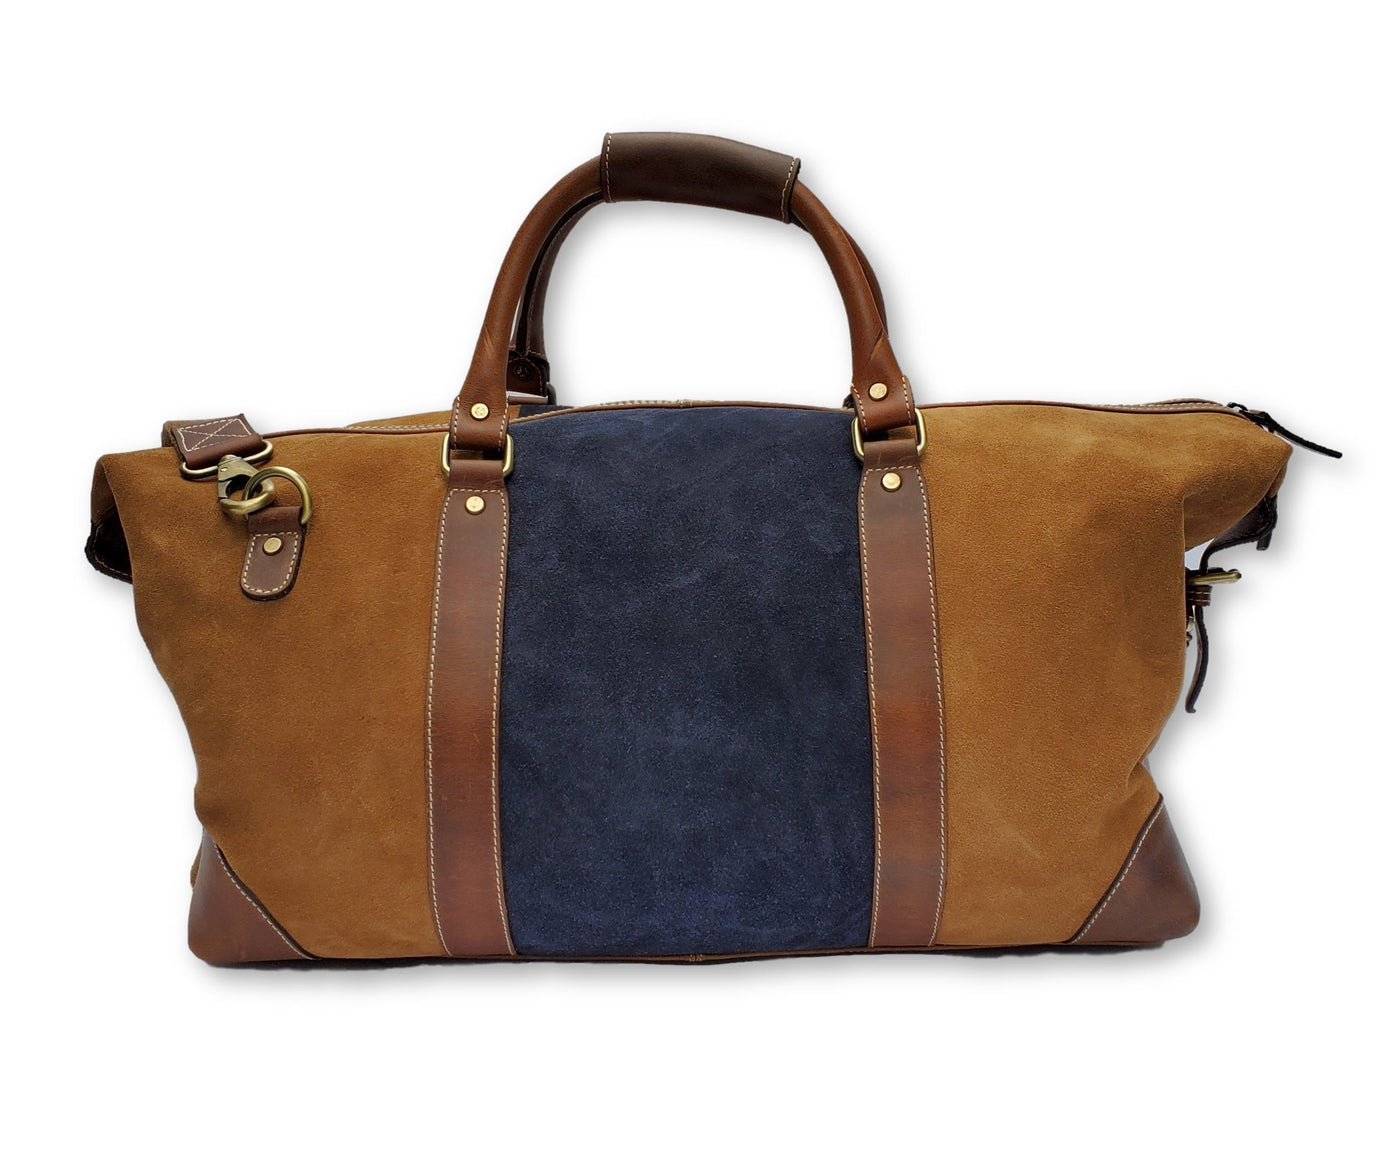 Light Blue & Brown Suede Leather Duffle Bag